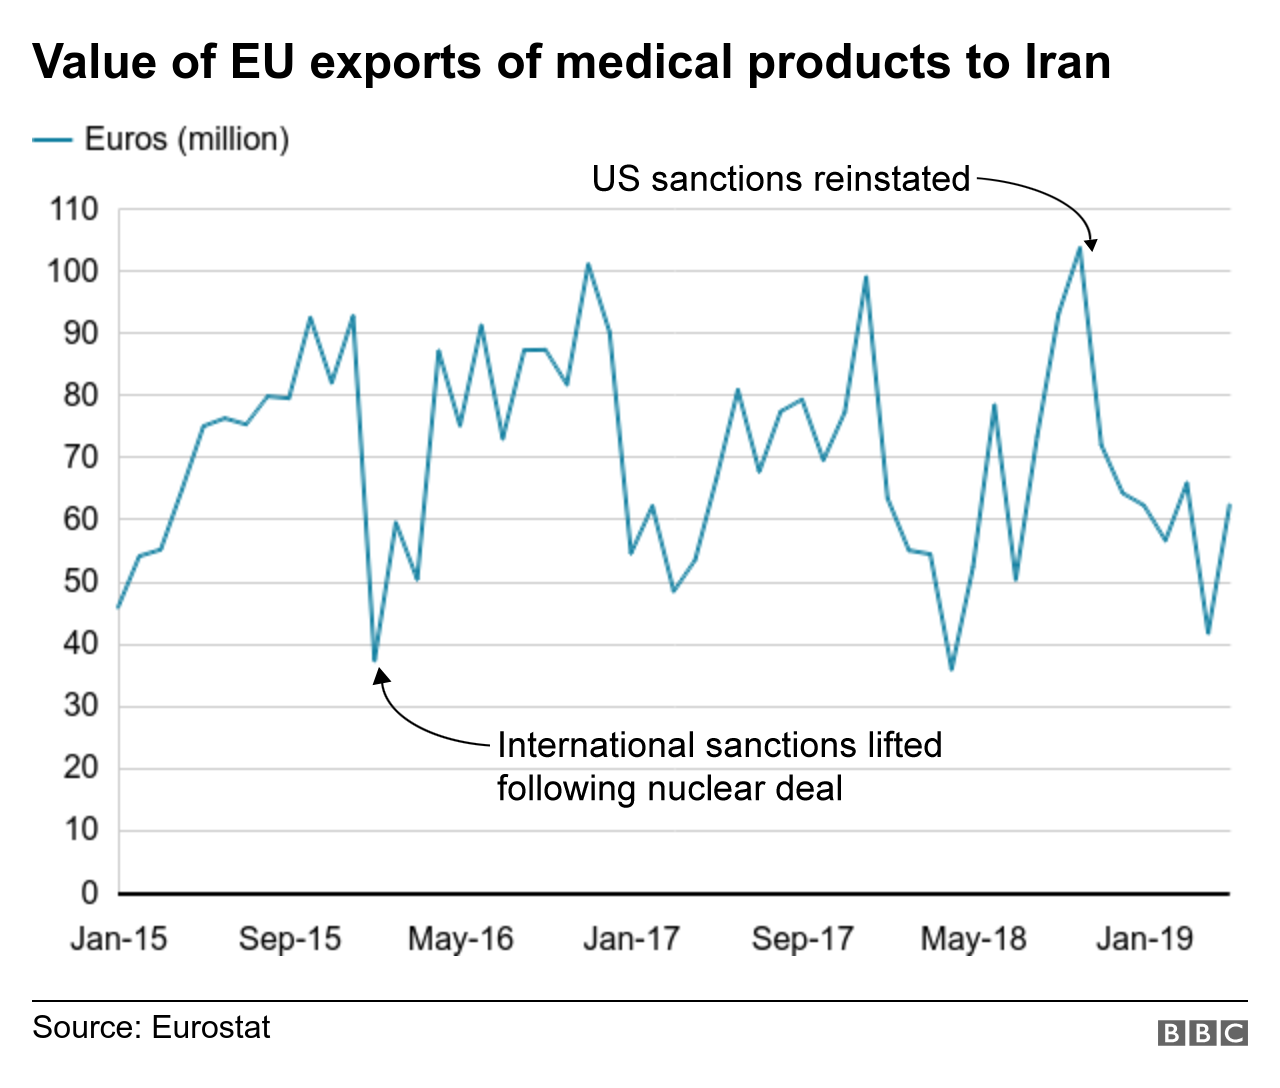 Chart shows the value of EU exports of medicines to Iran over time